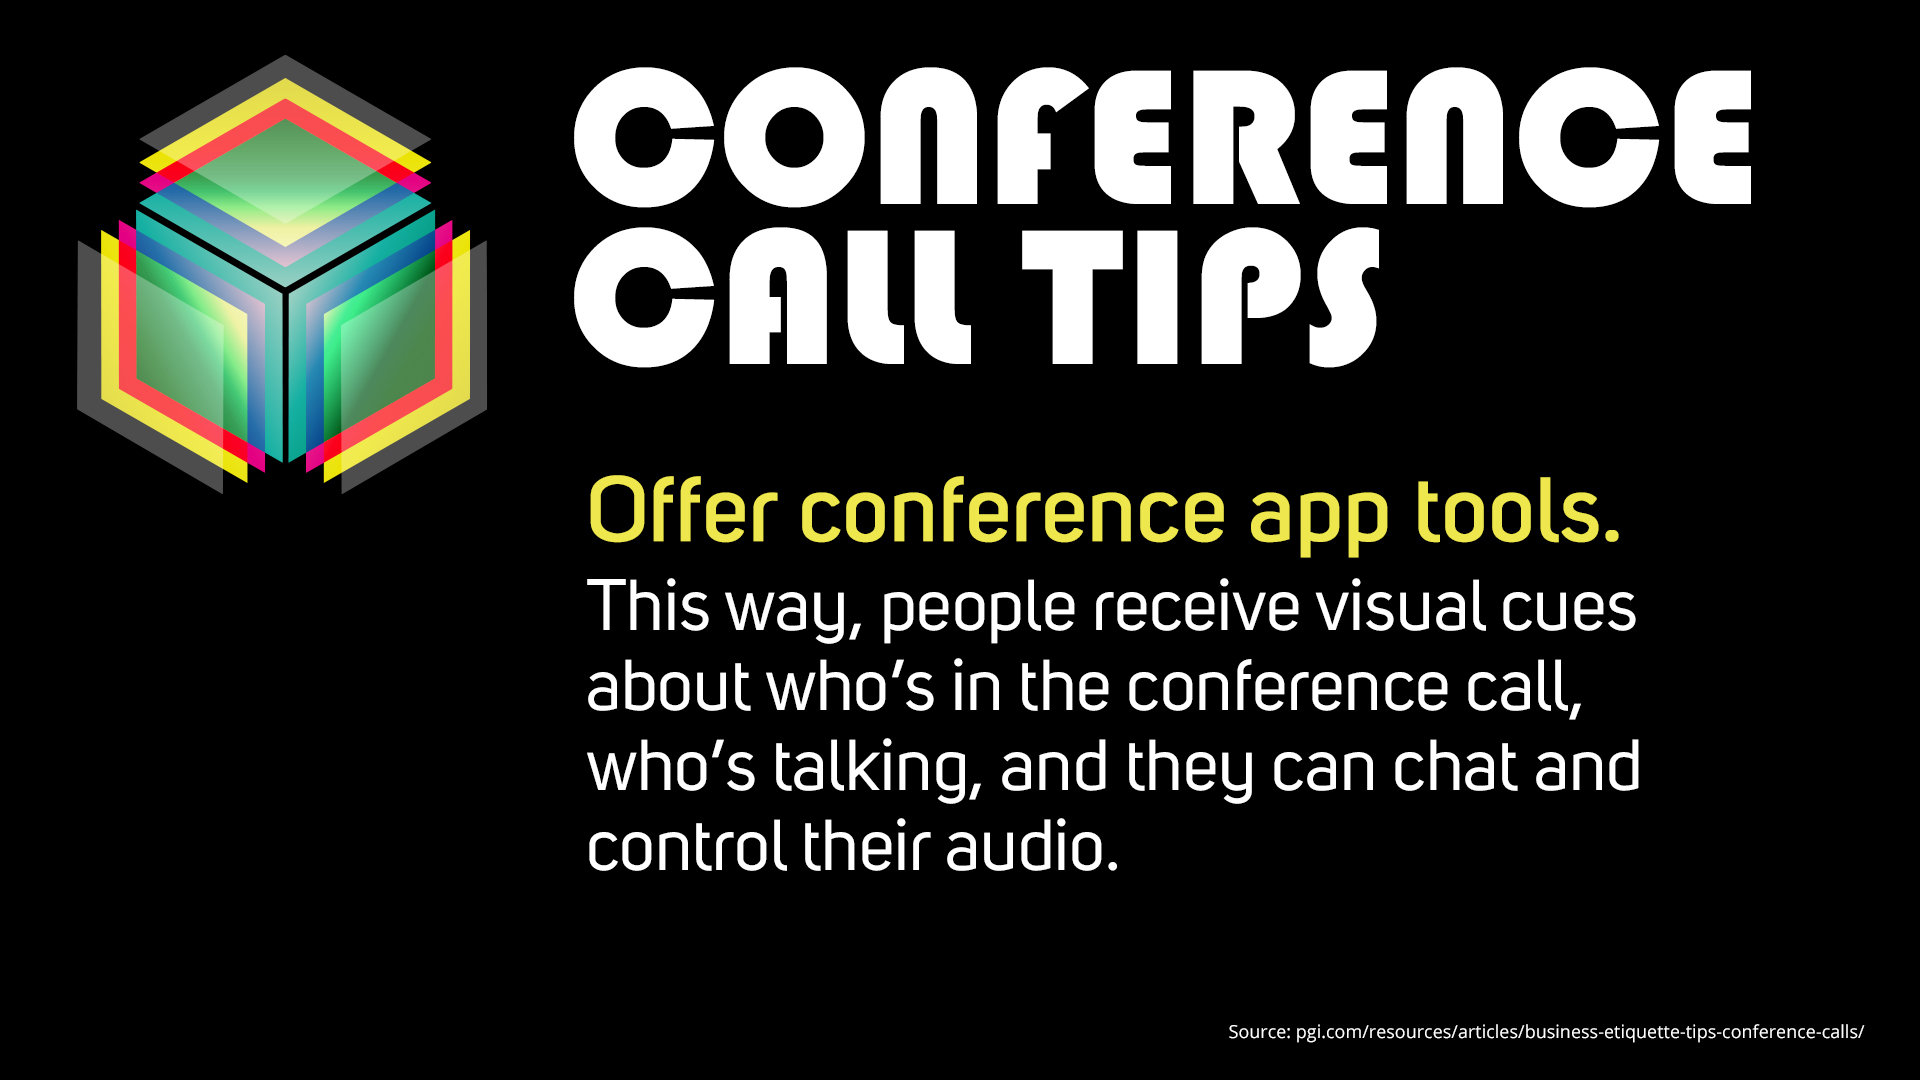 Free Graphic | Conference Call Tips | Offer conference app tools